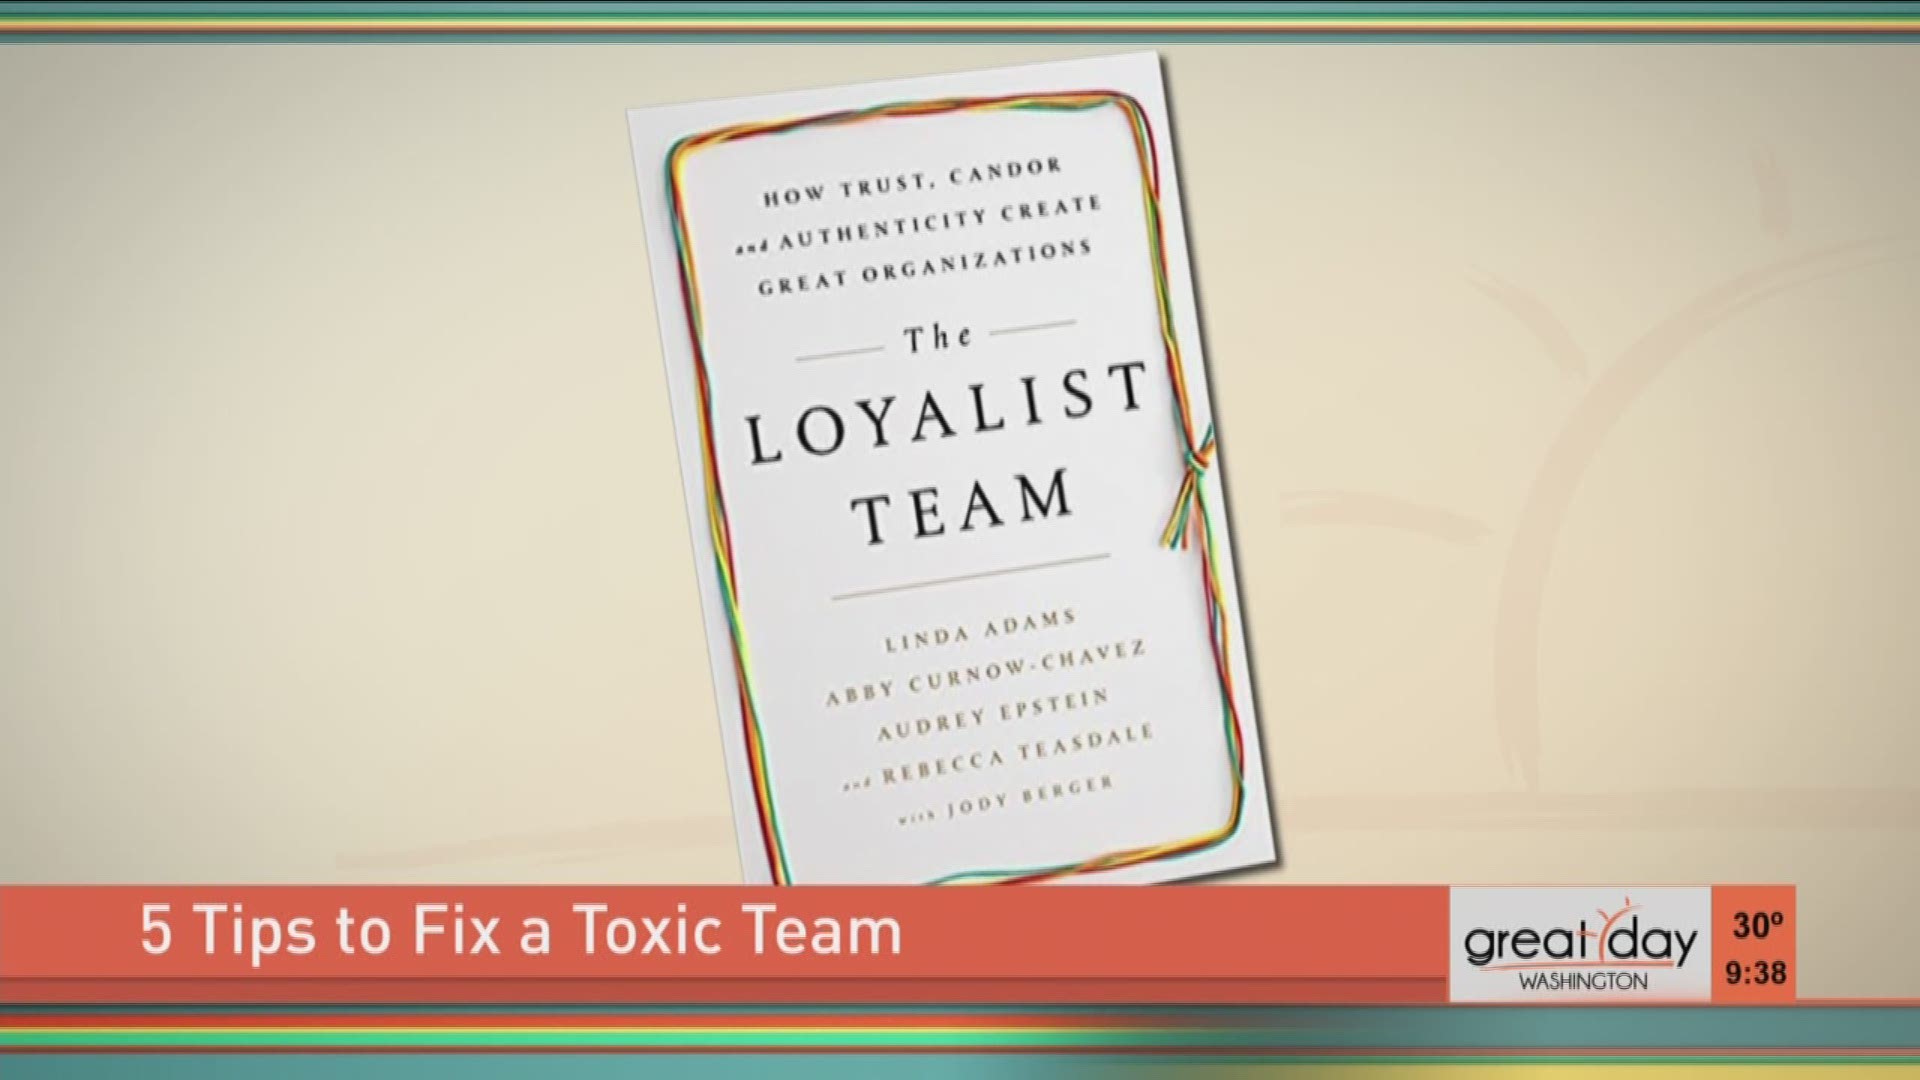 Linda Adams, Partner at The Trispective Group and co-author of "The Loyalist Team: How Trust, Candor, and Authenticity Create Great Organizations", shares how to detoxify your team. 